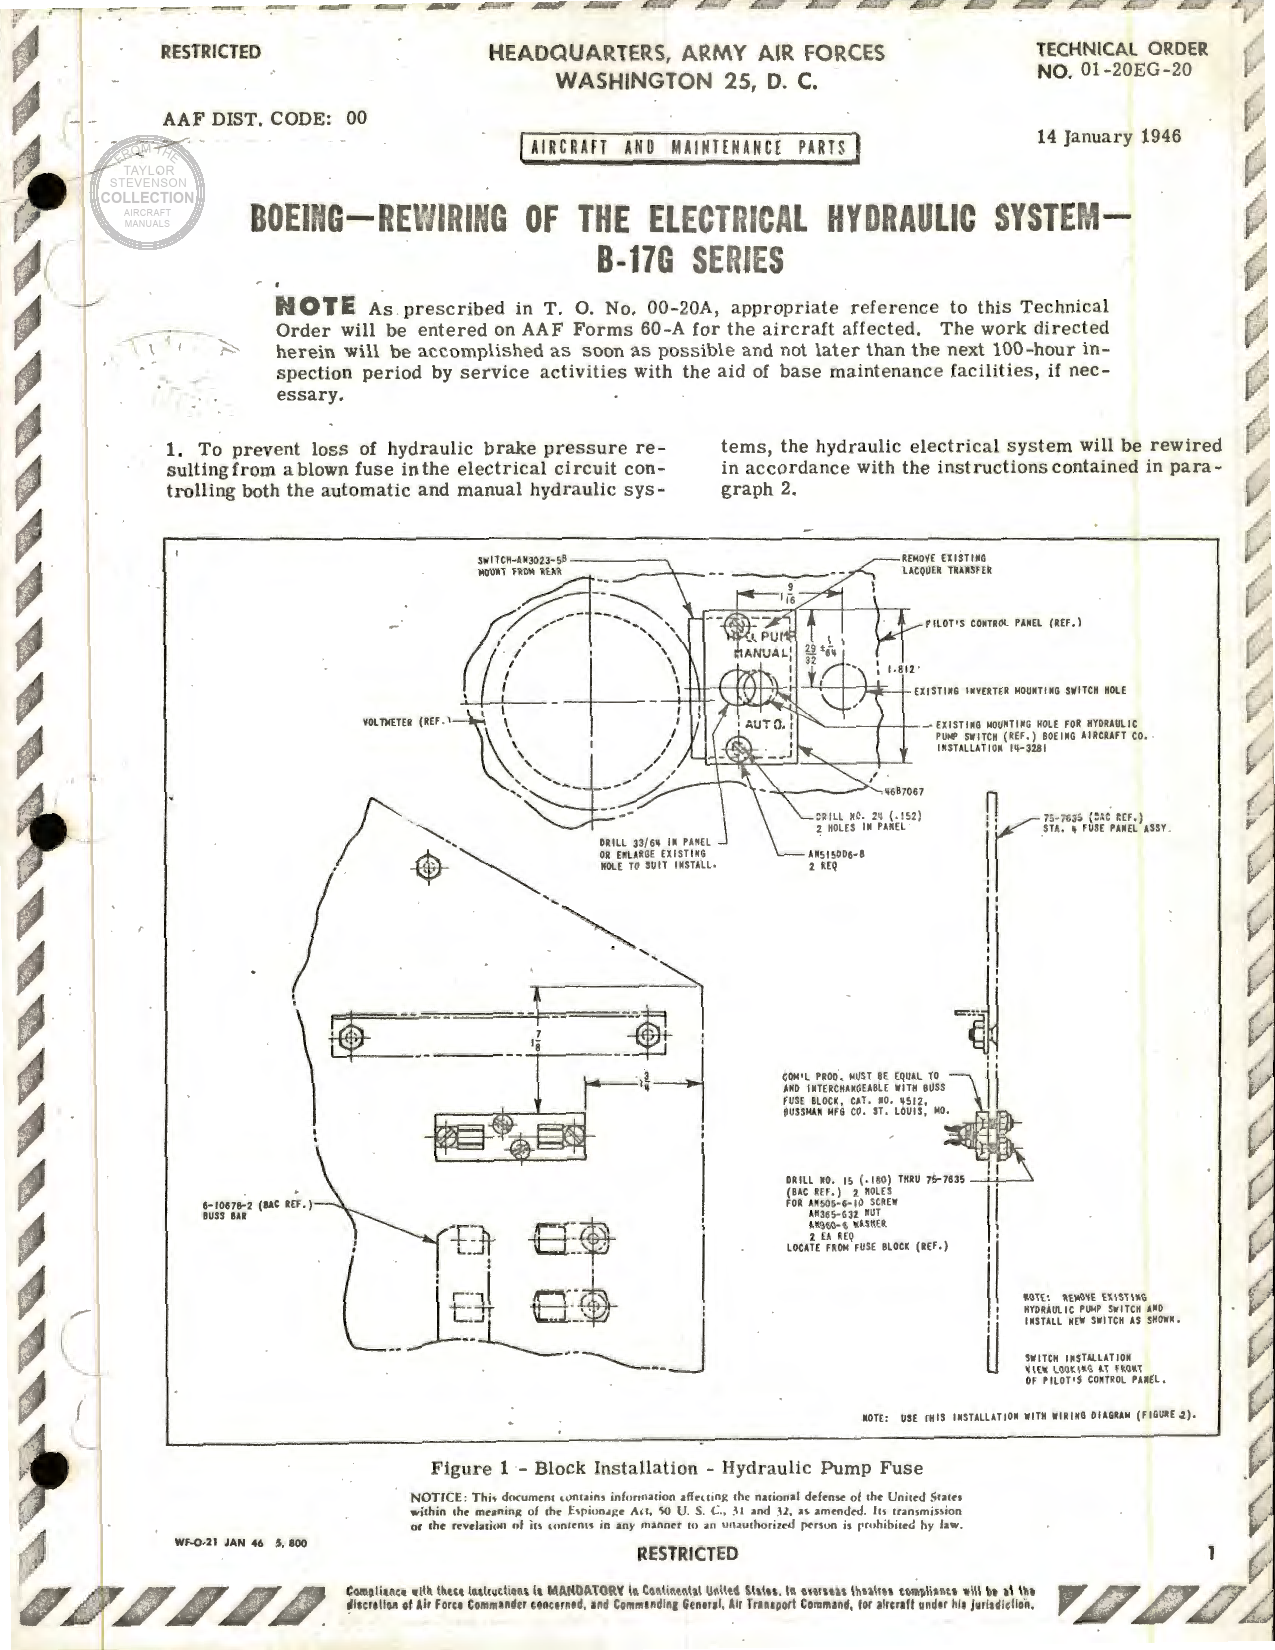 Sample page 1 from AirCorps Library document: Rewiring of the Electrical Hydraulic System for B-17G Series